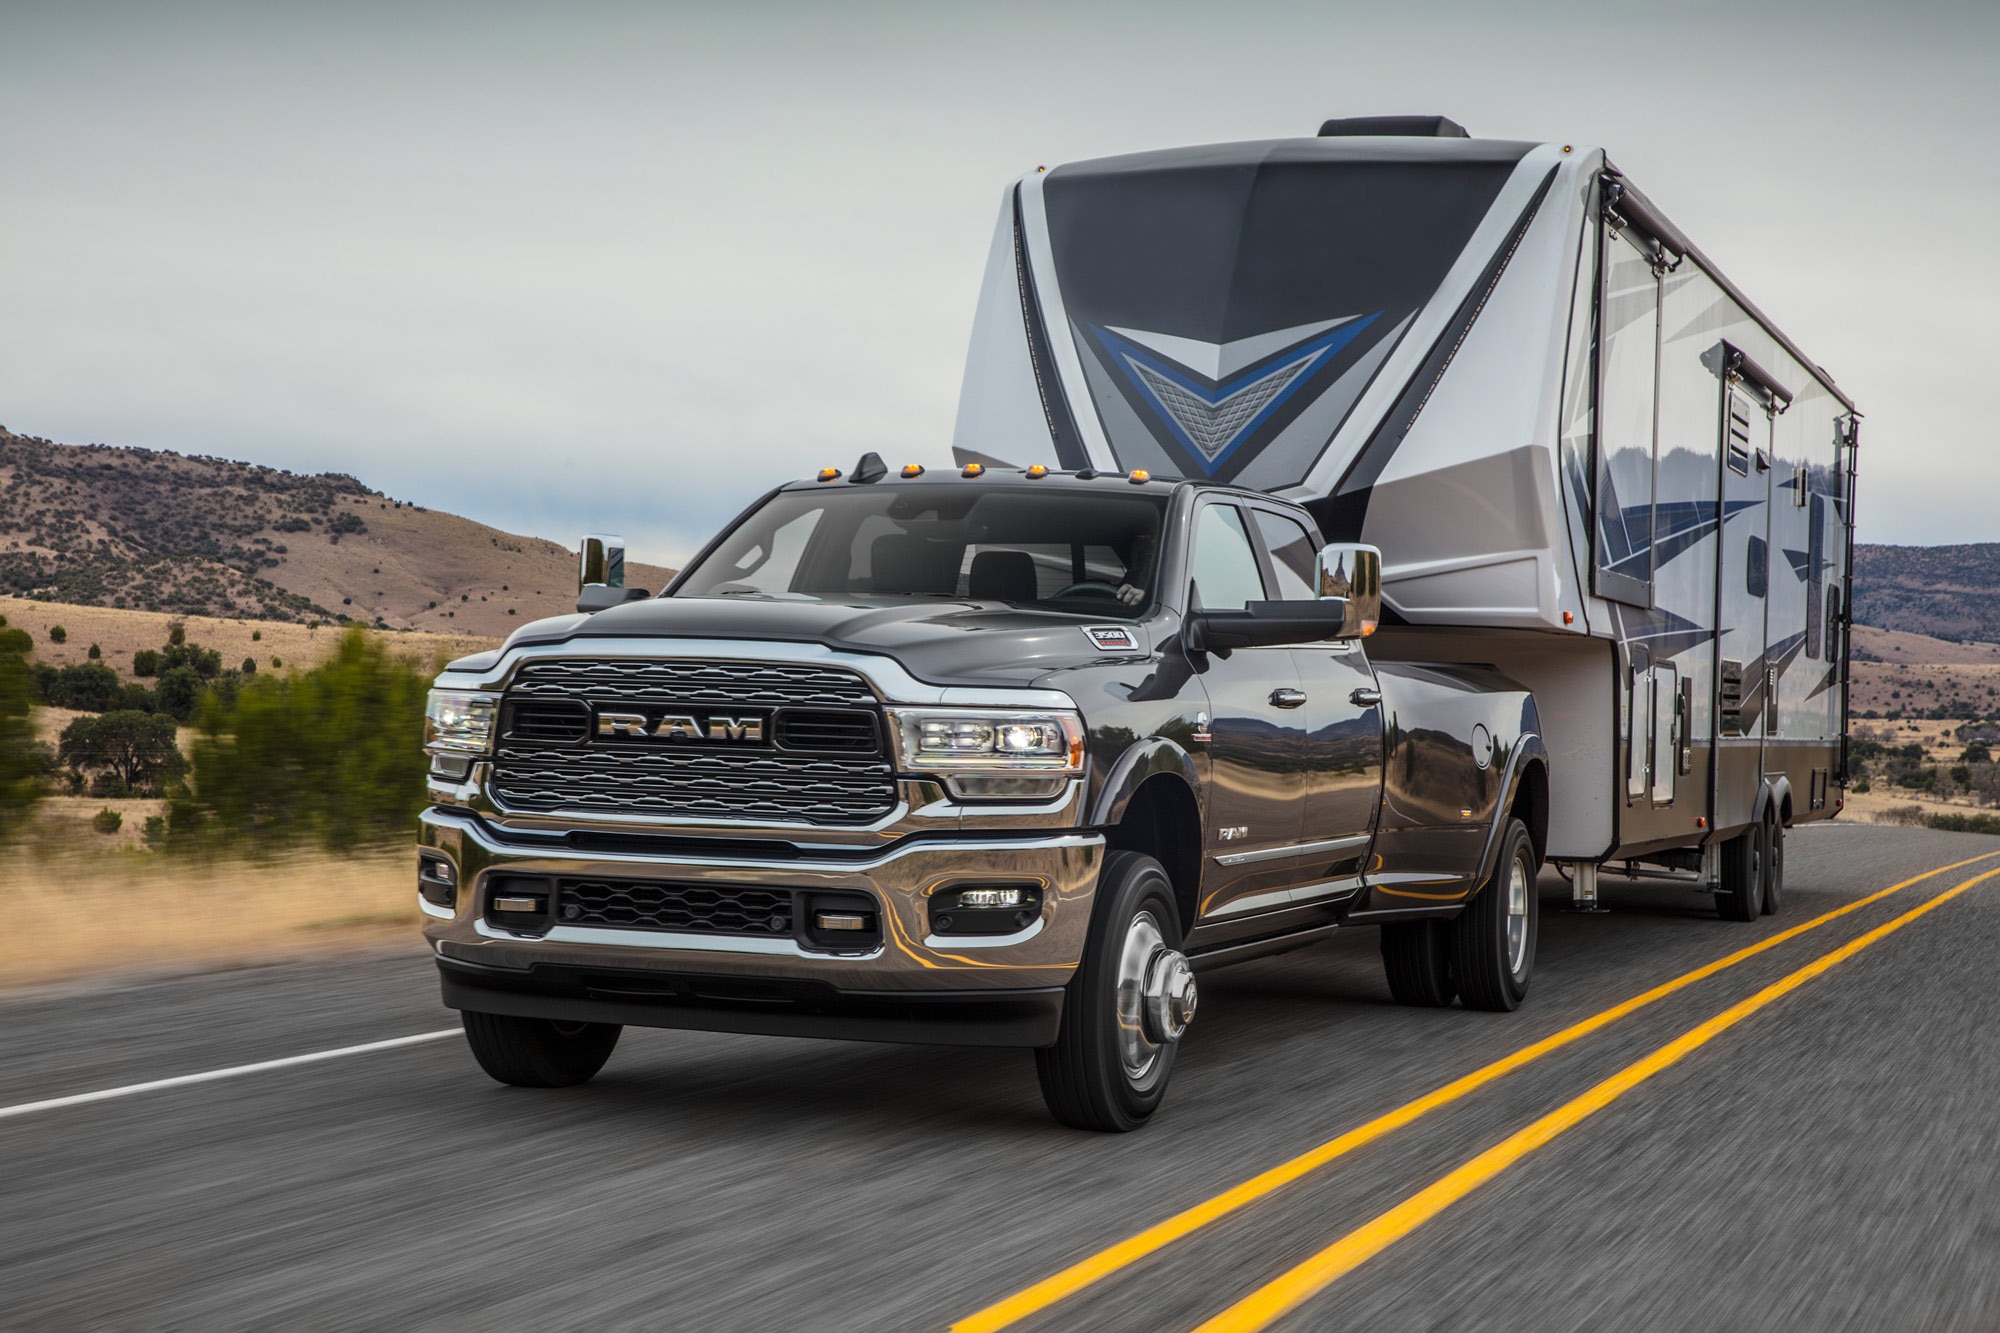 2023 Ram 3500 is towing a travel trailer down a rural highway.